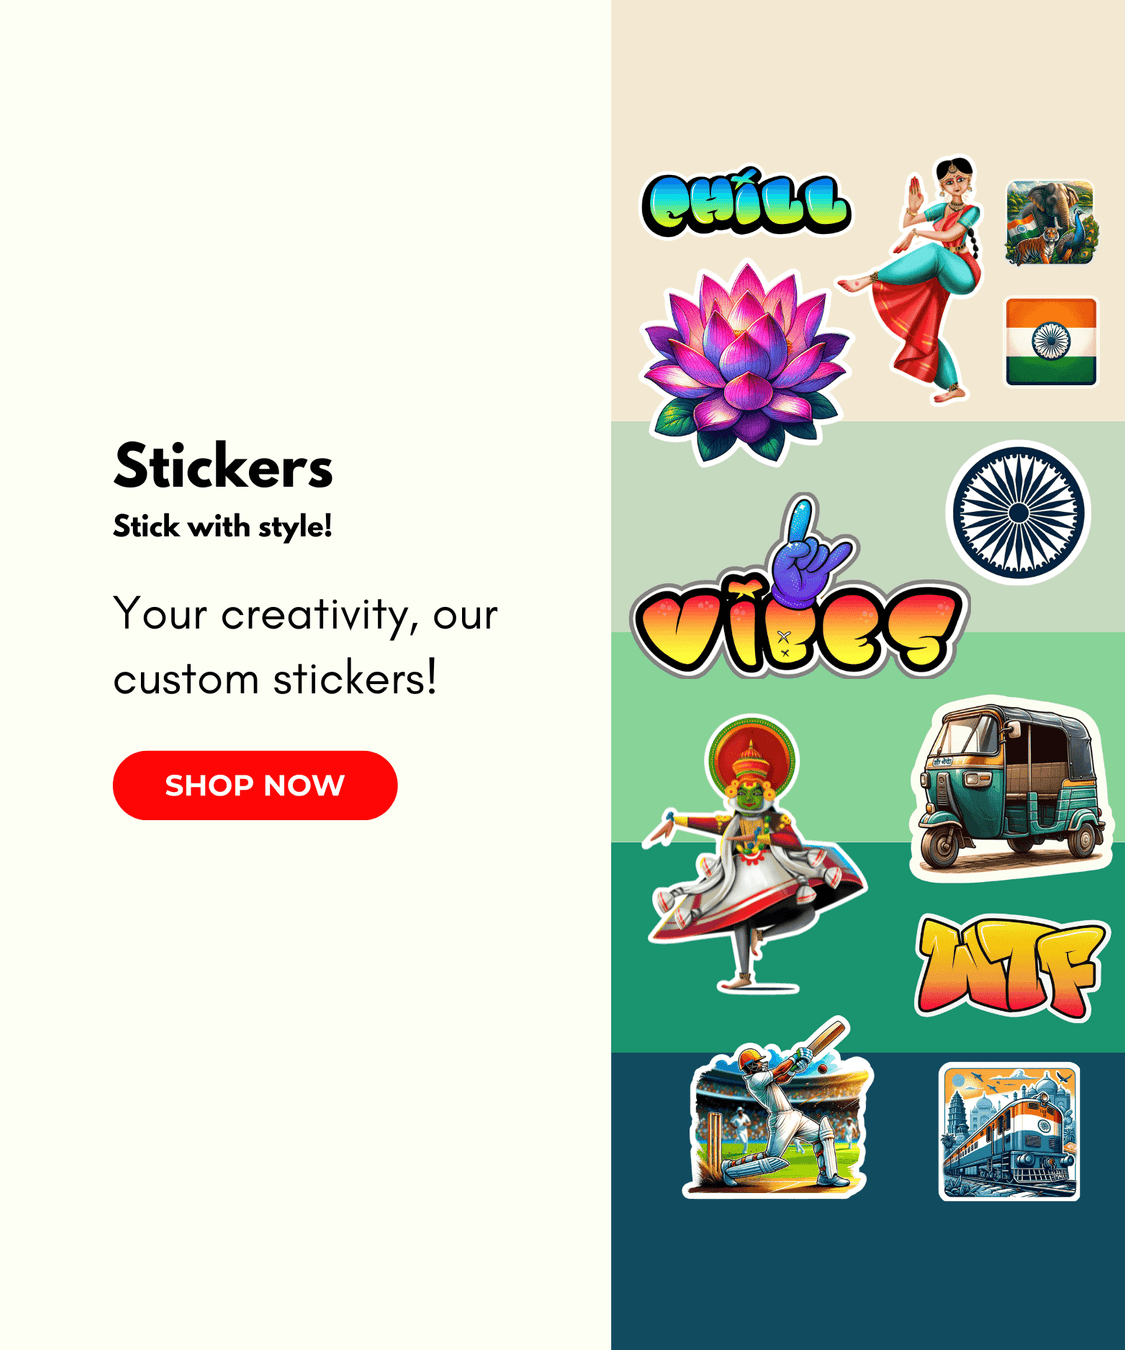 Your creativity, our custom stickers! - Dudus Online